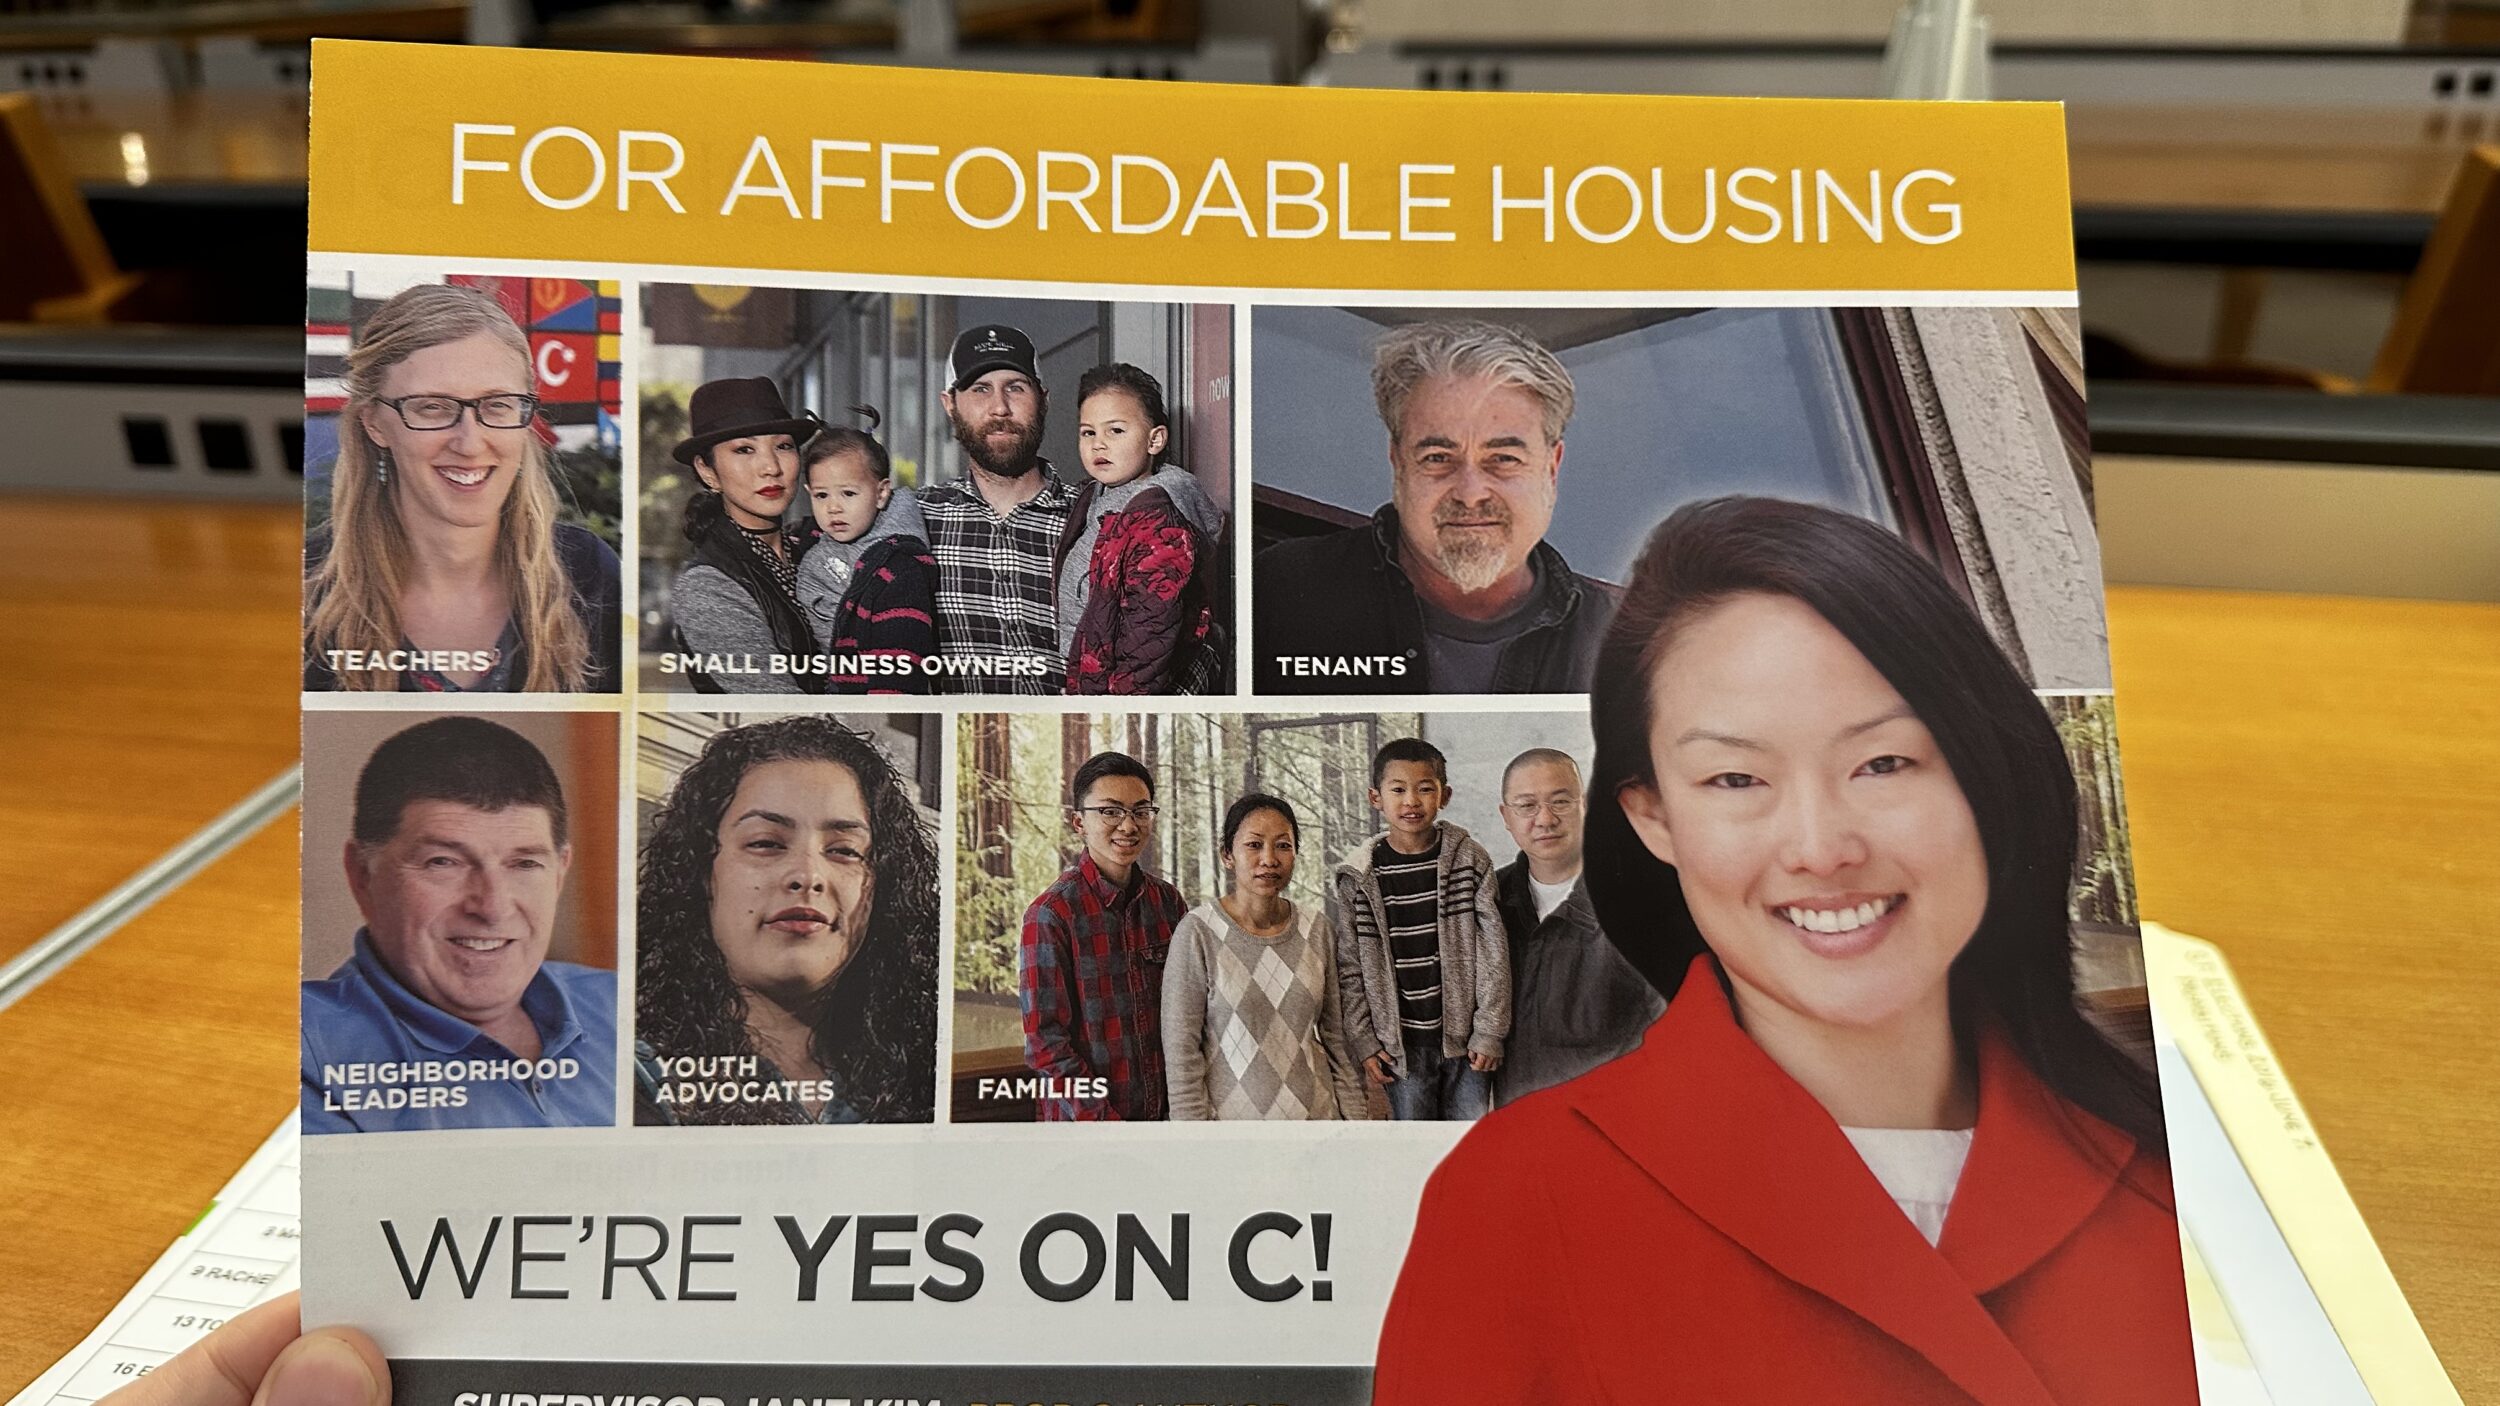 A flyer advocating for affordable housing featuring diverse individuals labeled as teachers, small business owners, tenants, and more.